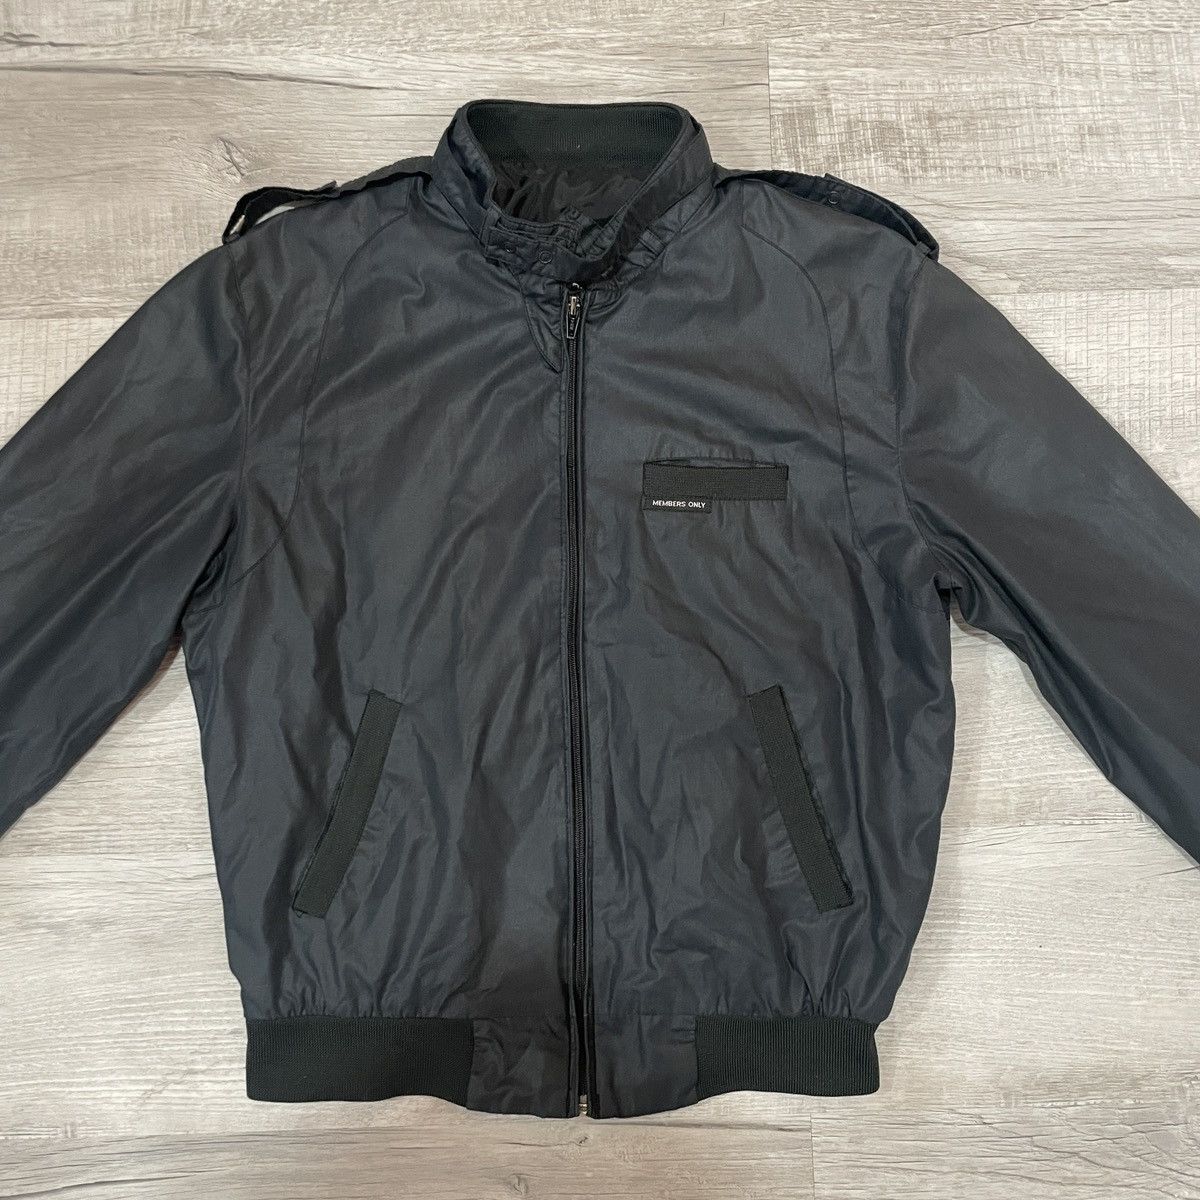 Members Only Members Only Racer Jacket | Grailed